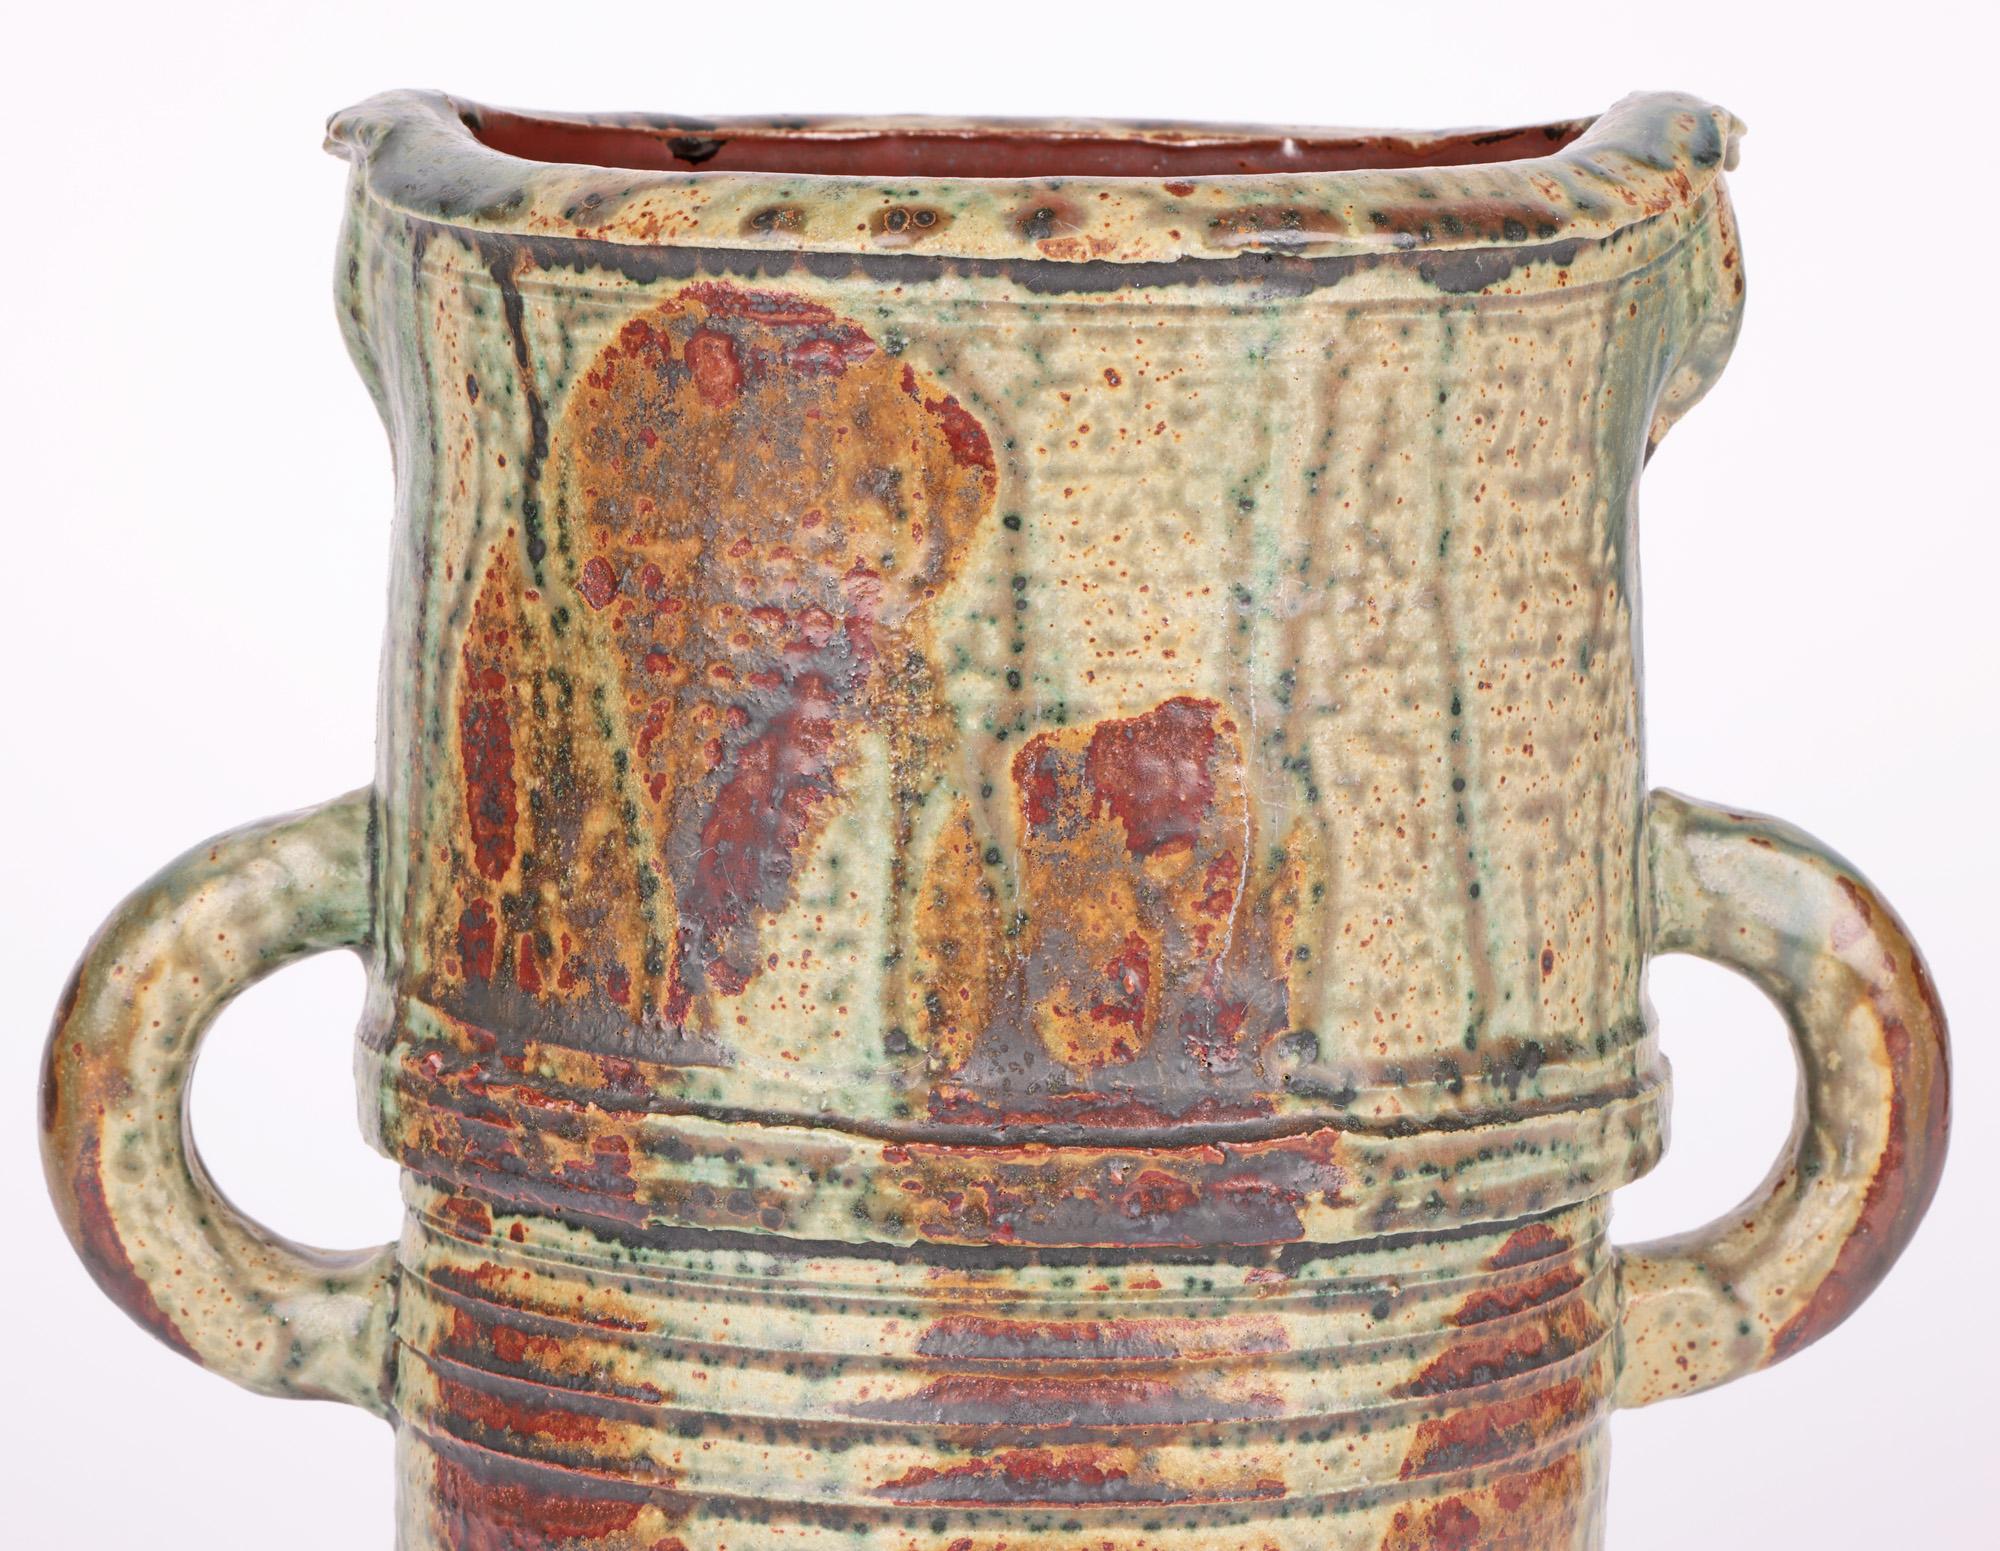 A very large and impressive twin handled studio pottery vase with a streaked and salt glazed finish probably dating from the 20th century. The vase stands on a wide round unglazed foot and is of tall cylindrical shape with horizontal incised linear